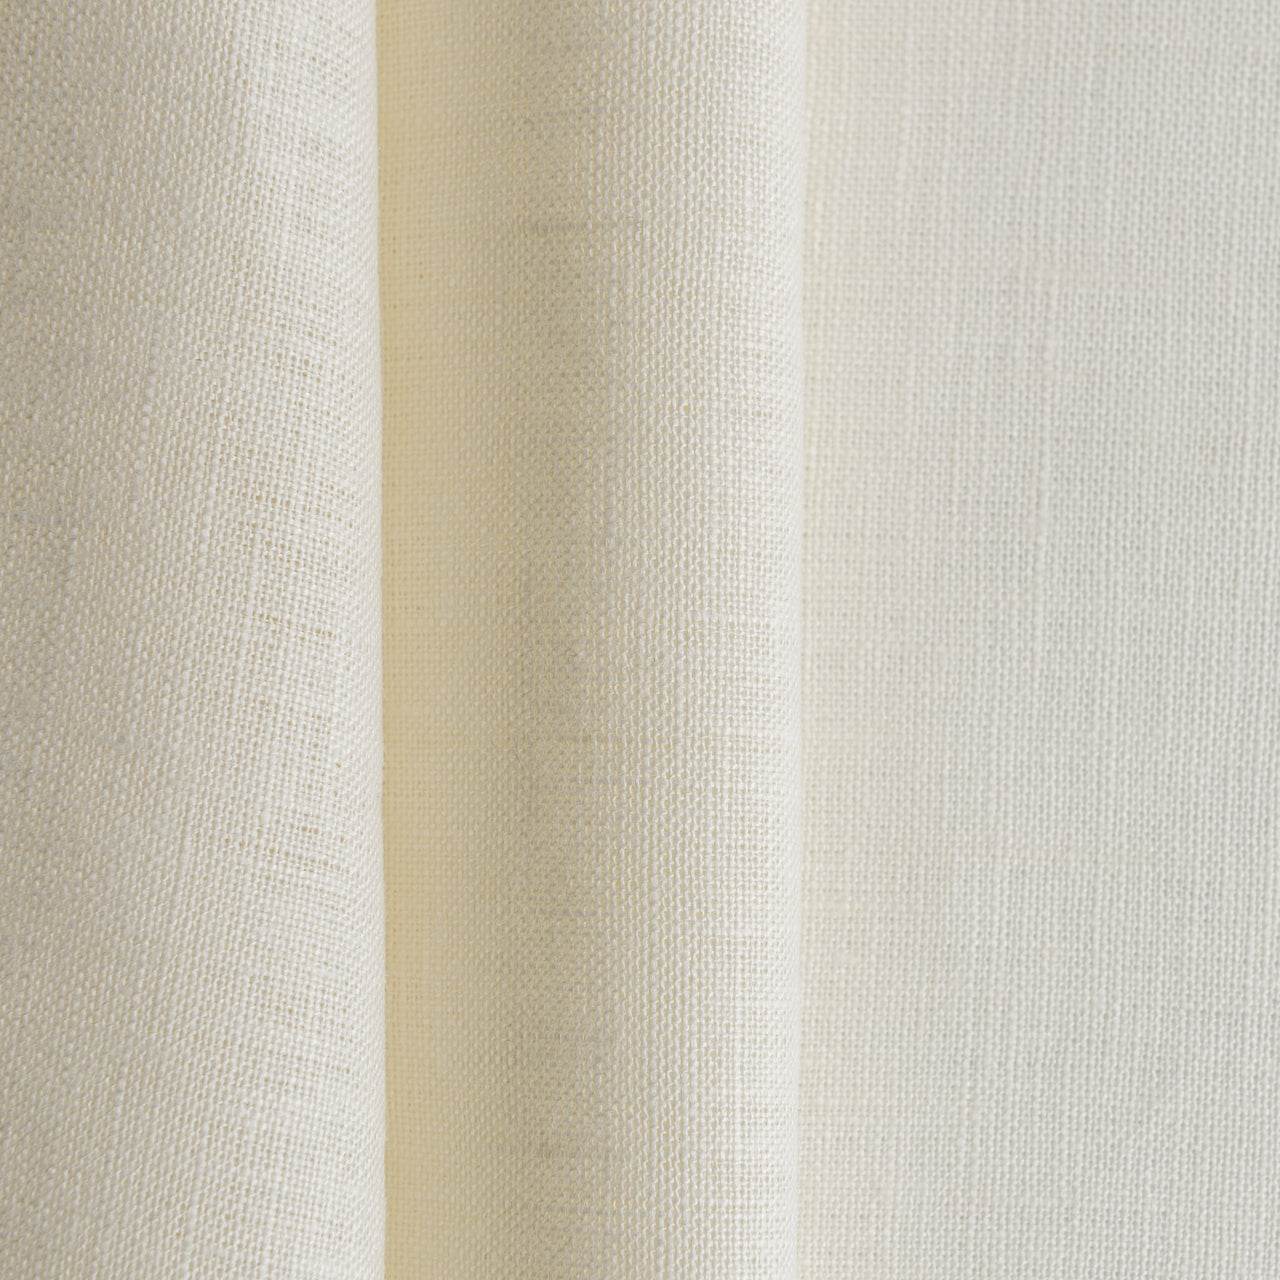 Cream S-fold Linen Curtain Panel - Suitable for Rings and Hooks or Track, Color: Cream